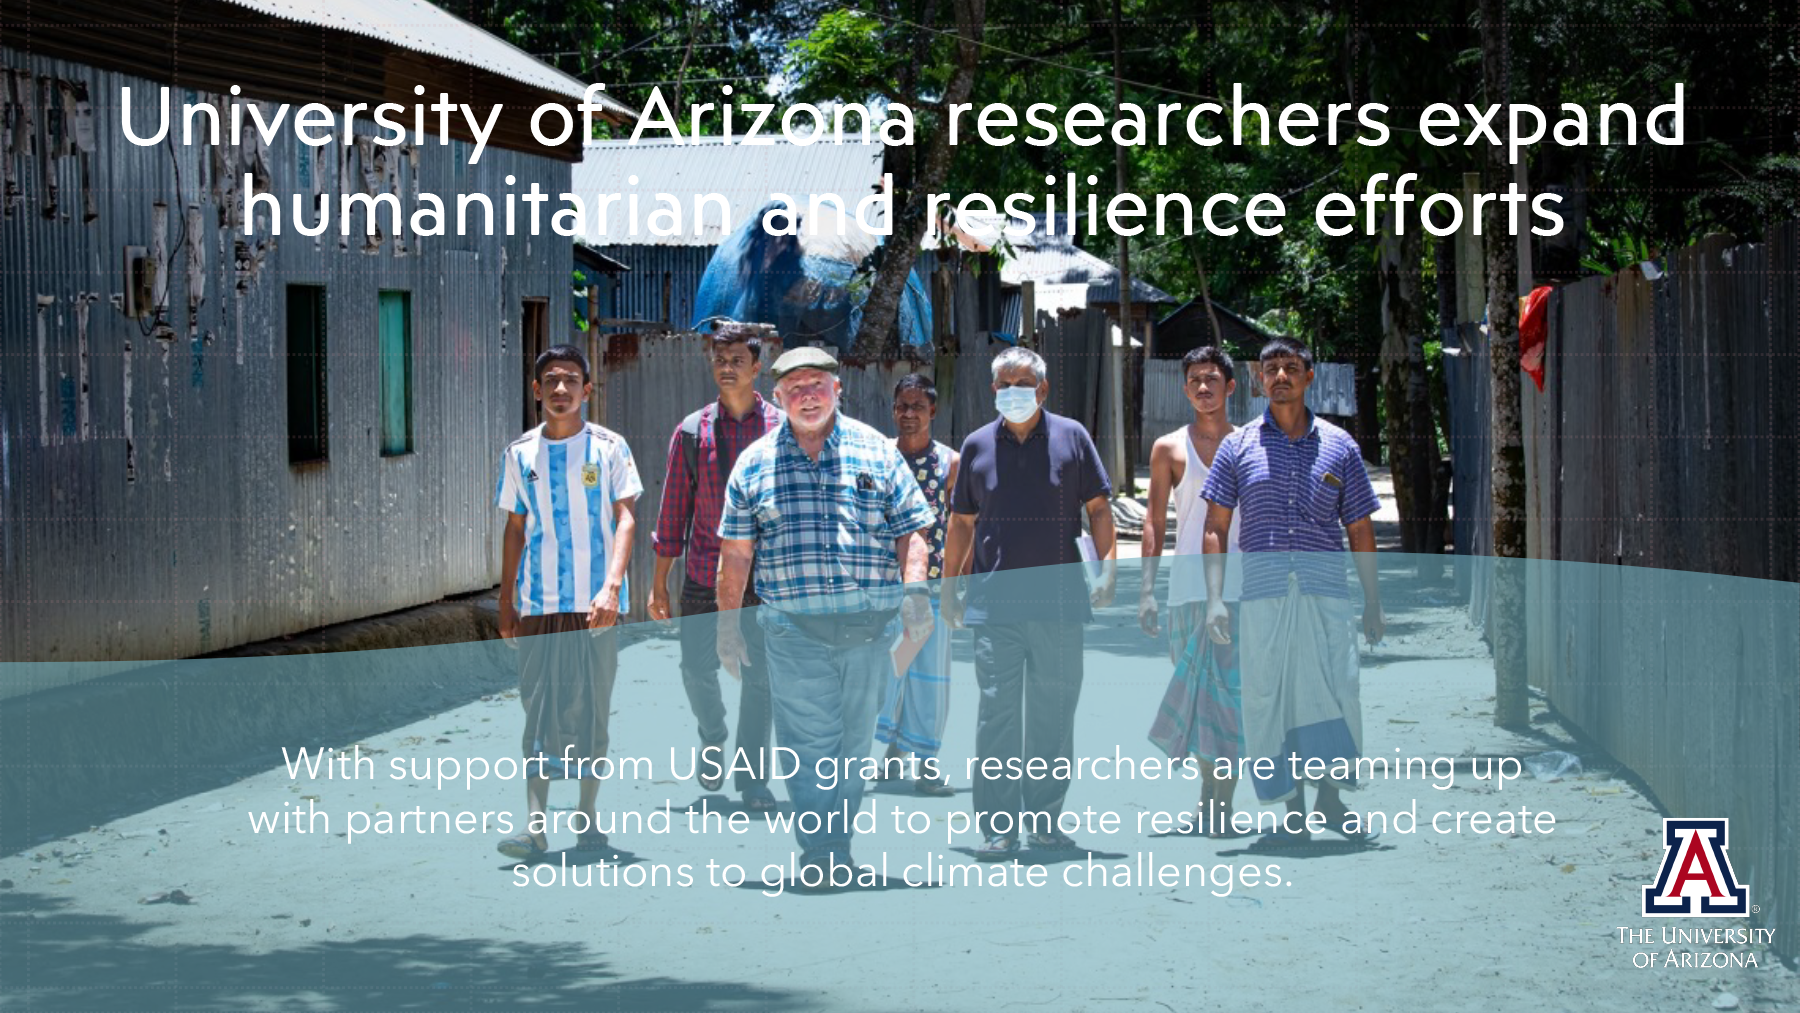 University of Arizona researchers expand humanitarian and resilience efforts